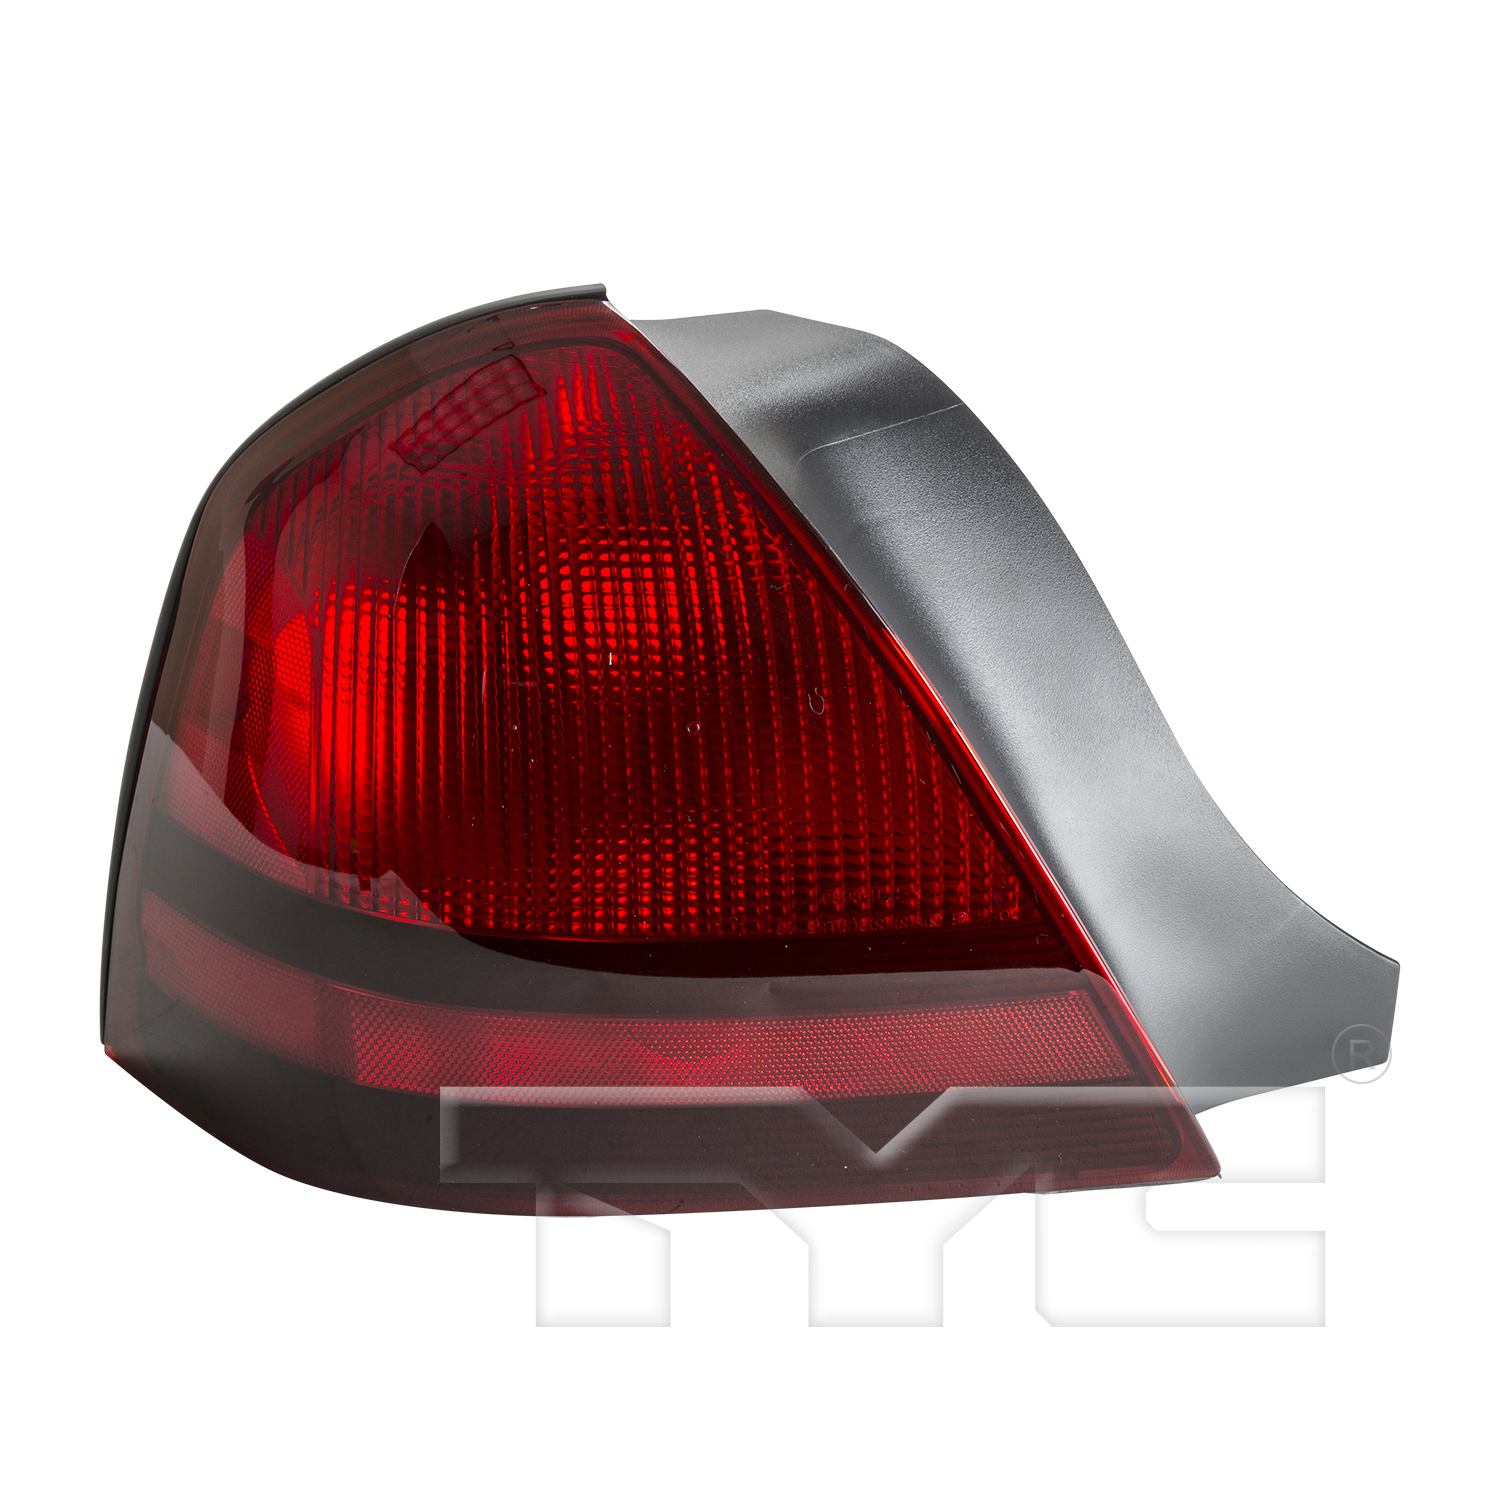 Aftermarket TAILLIGHTS for MERCURY - GRAND MARQUIS, GRAND MARQUIS,03-11,LT Taillamp assy